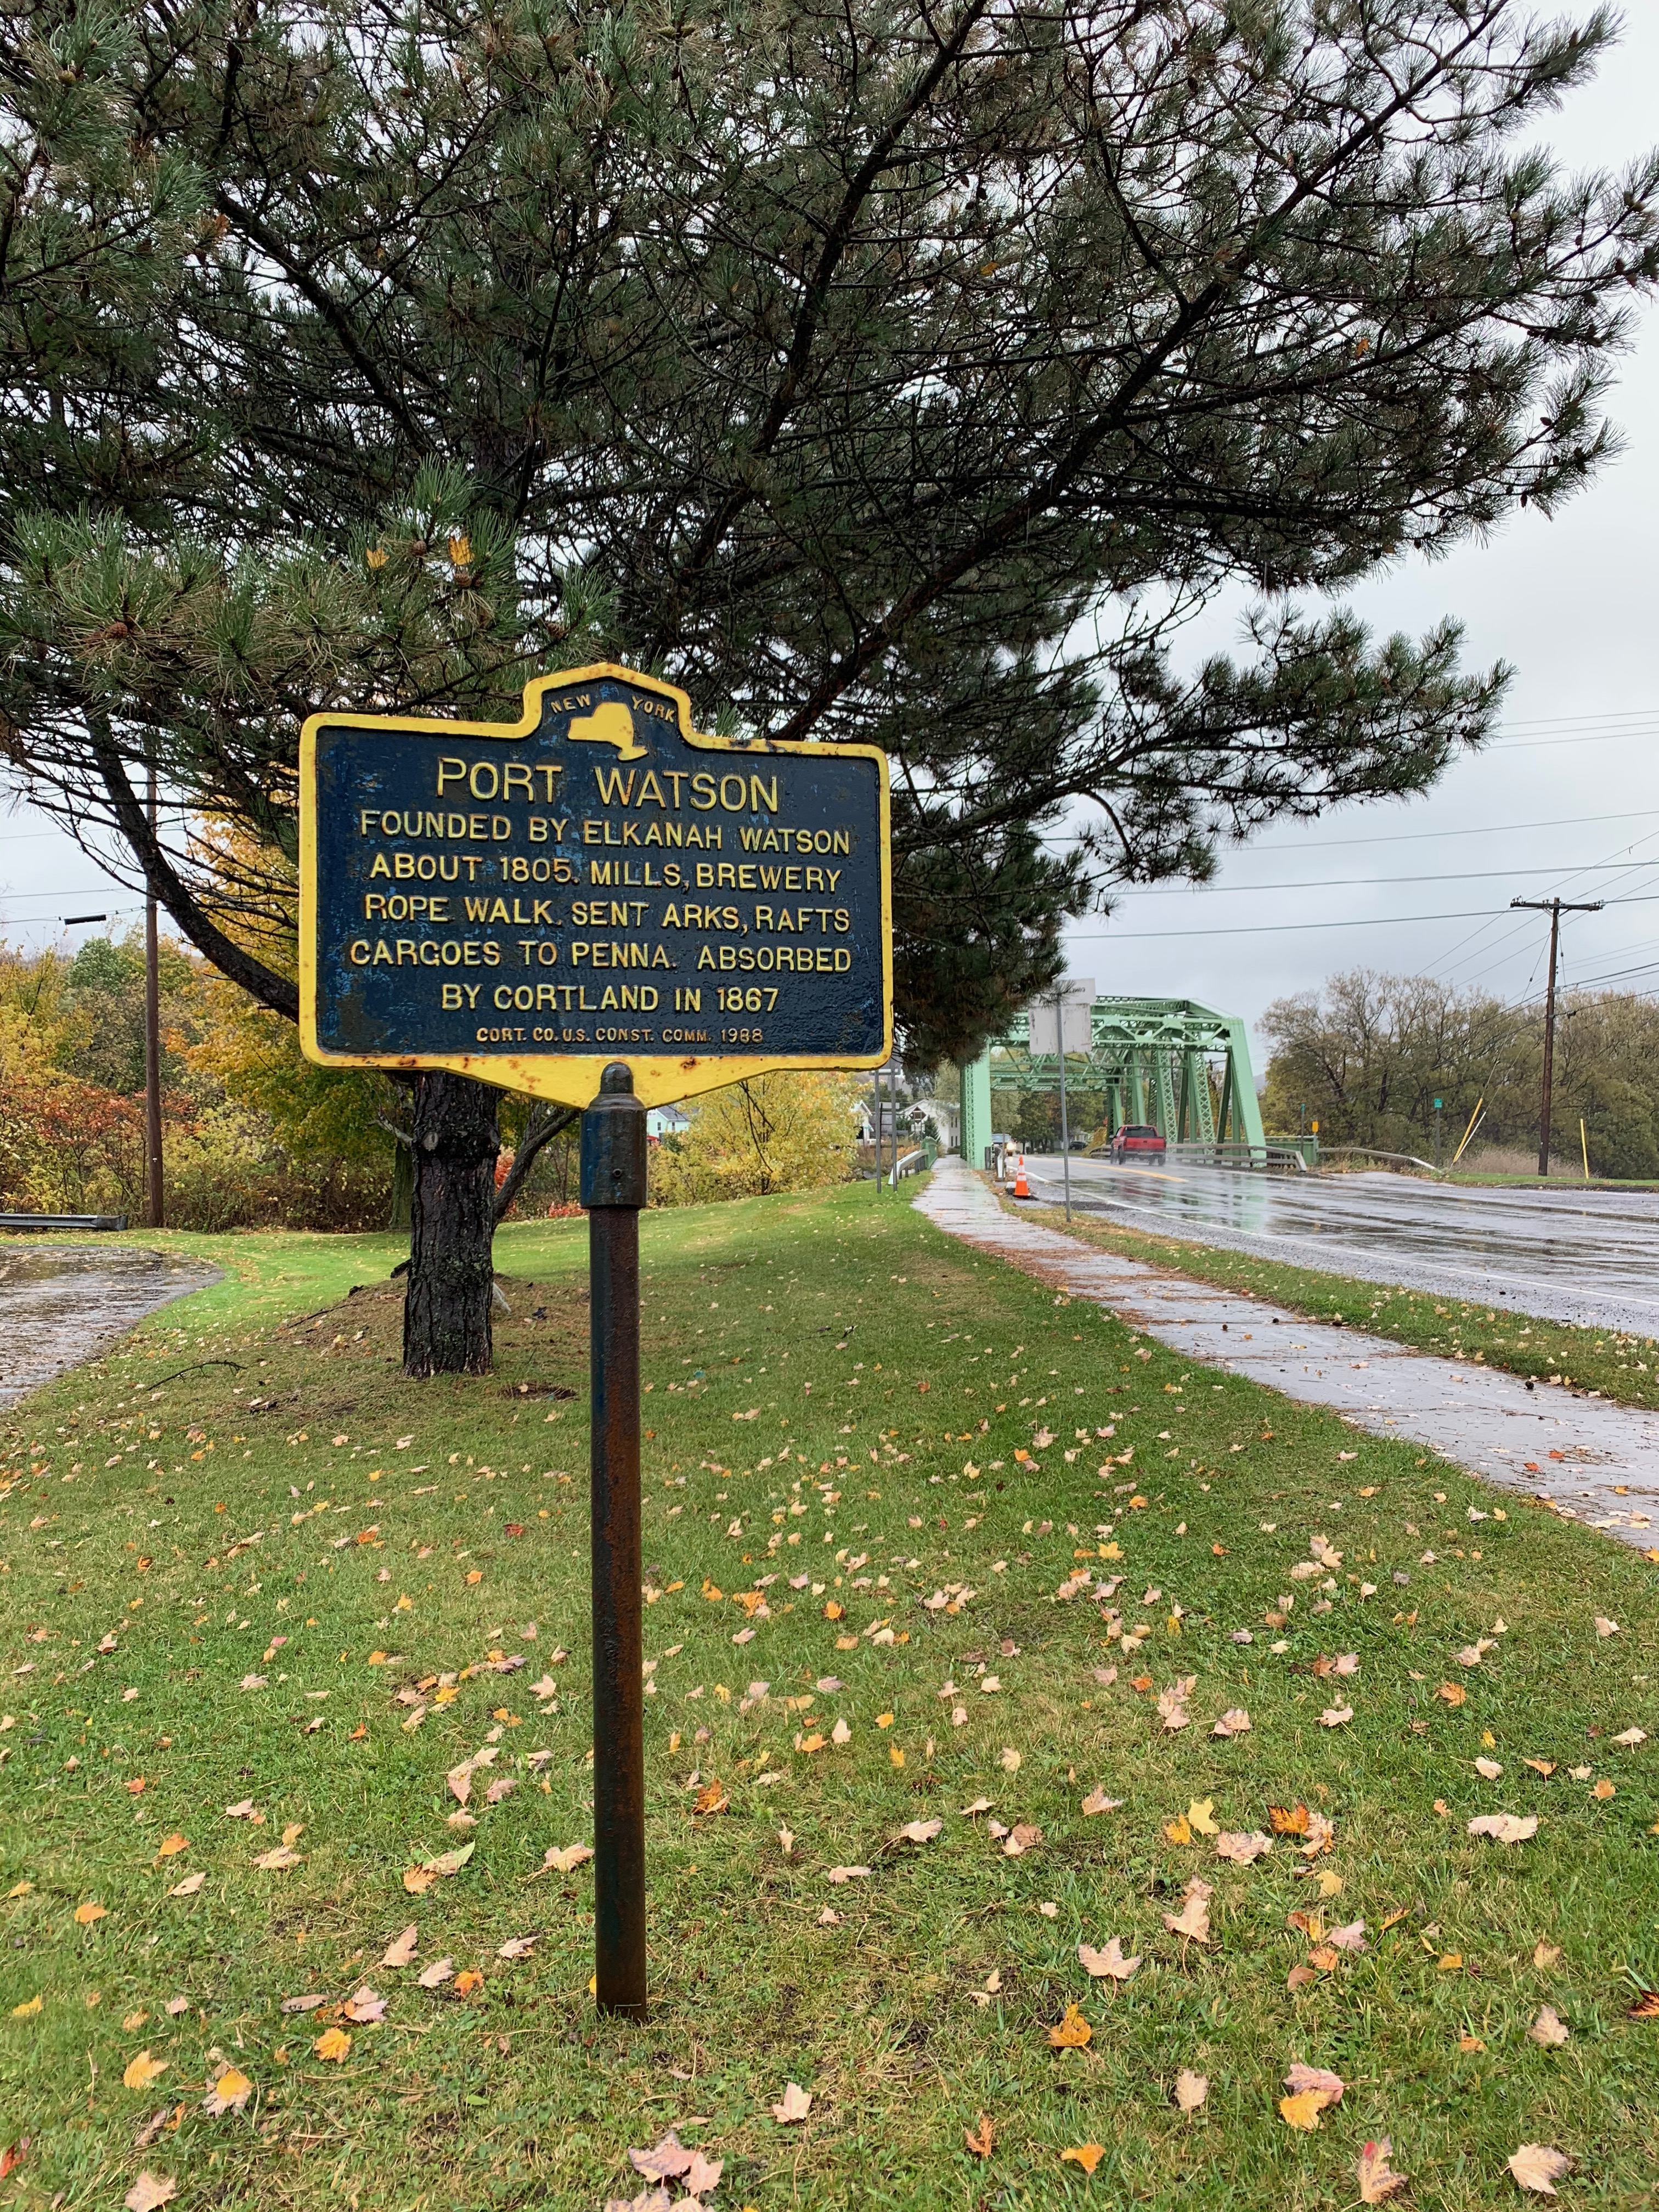 Students at SUNY Cortland worked with the Cortland County Historical Society and Experience Cortland, the county’s tourism bureau, to locate and map 50 roadside markers onto the digital history platform Clio.